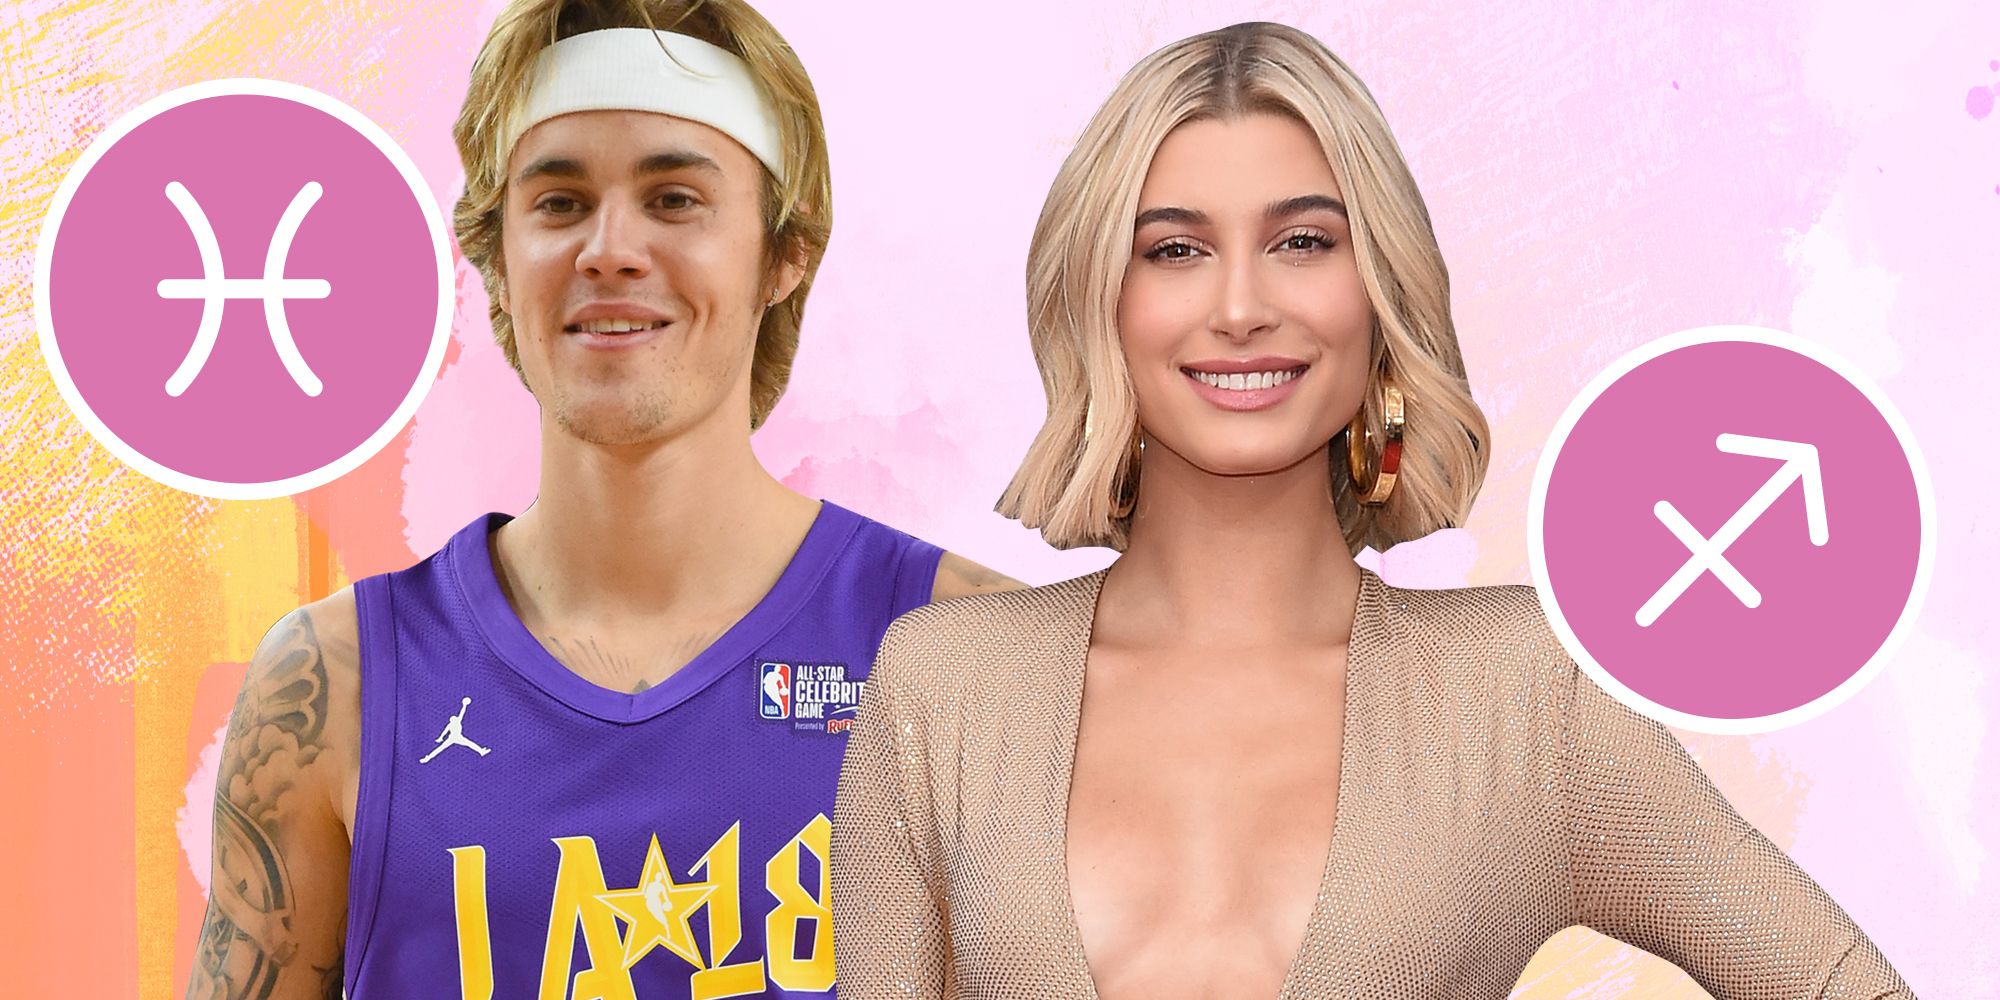 Justin Bieber has star-crossed chemistry with Hailey Baldwin